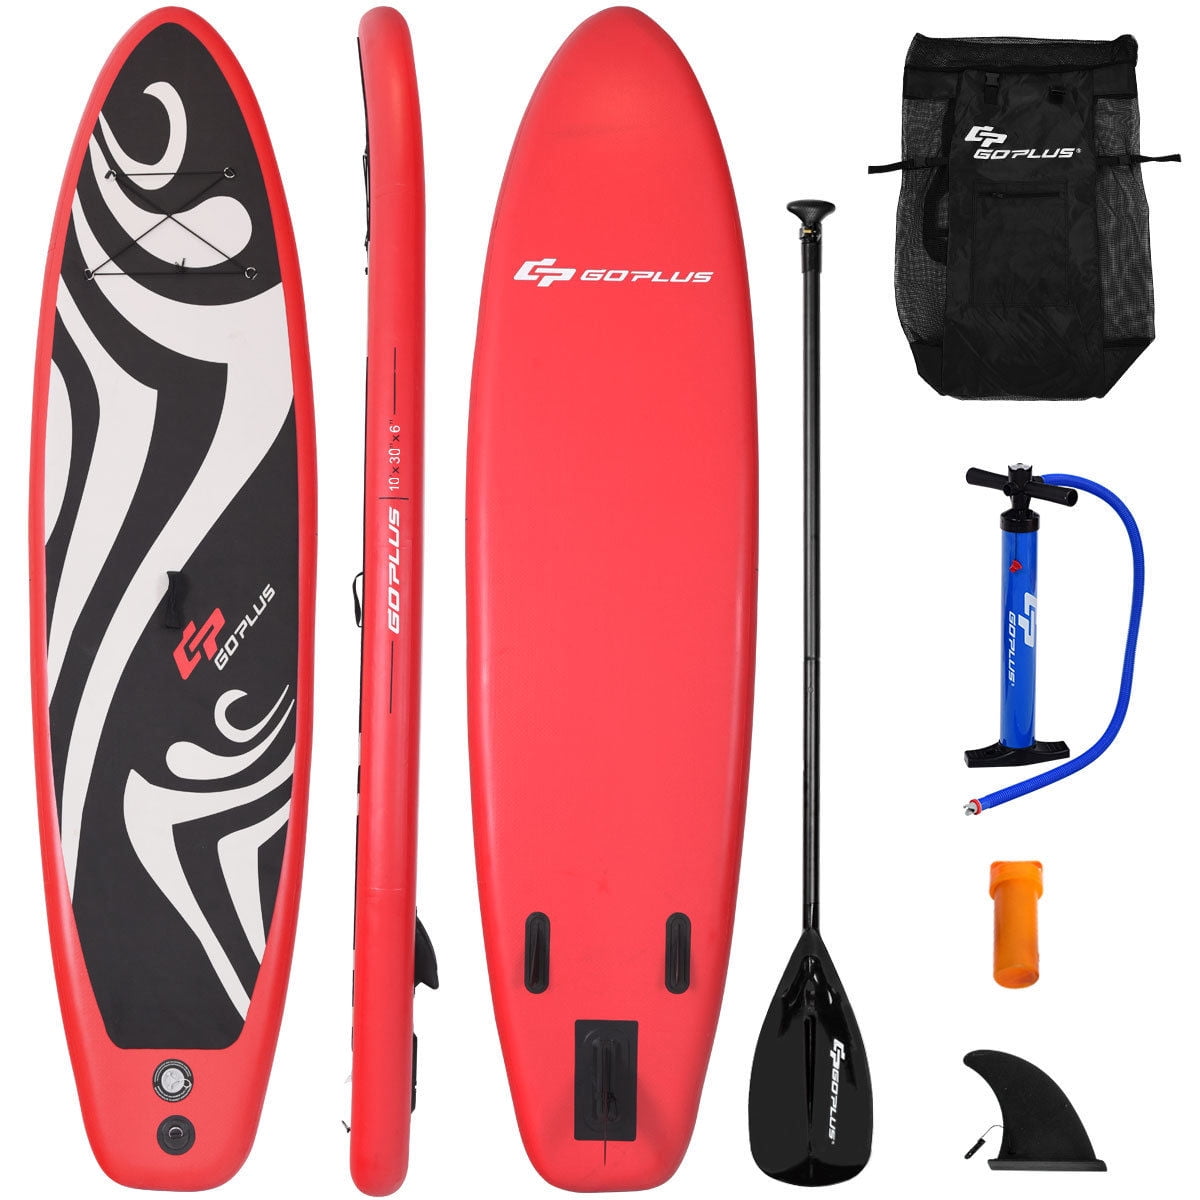 Goplus 10' Inflatable Stand up Paddle Board Surfboard SUP W/ Bag ...